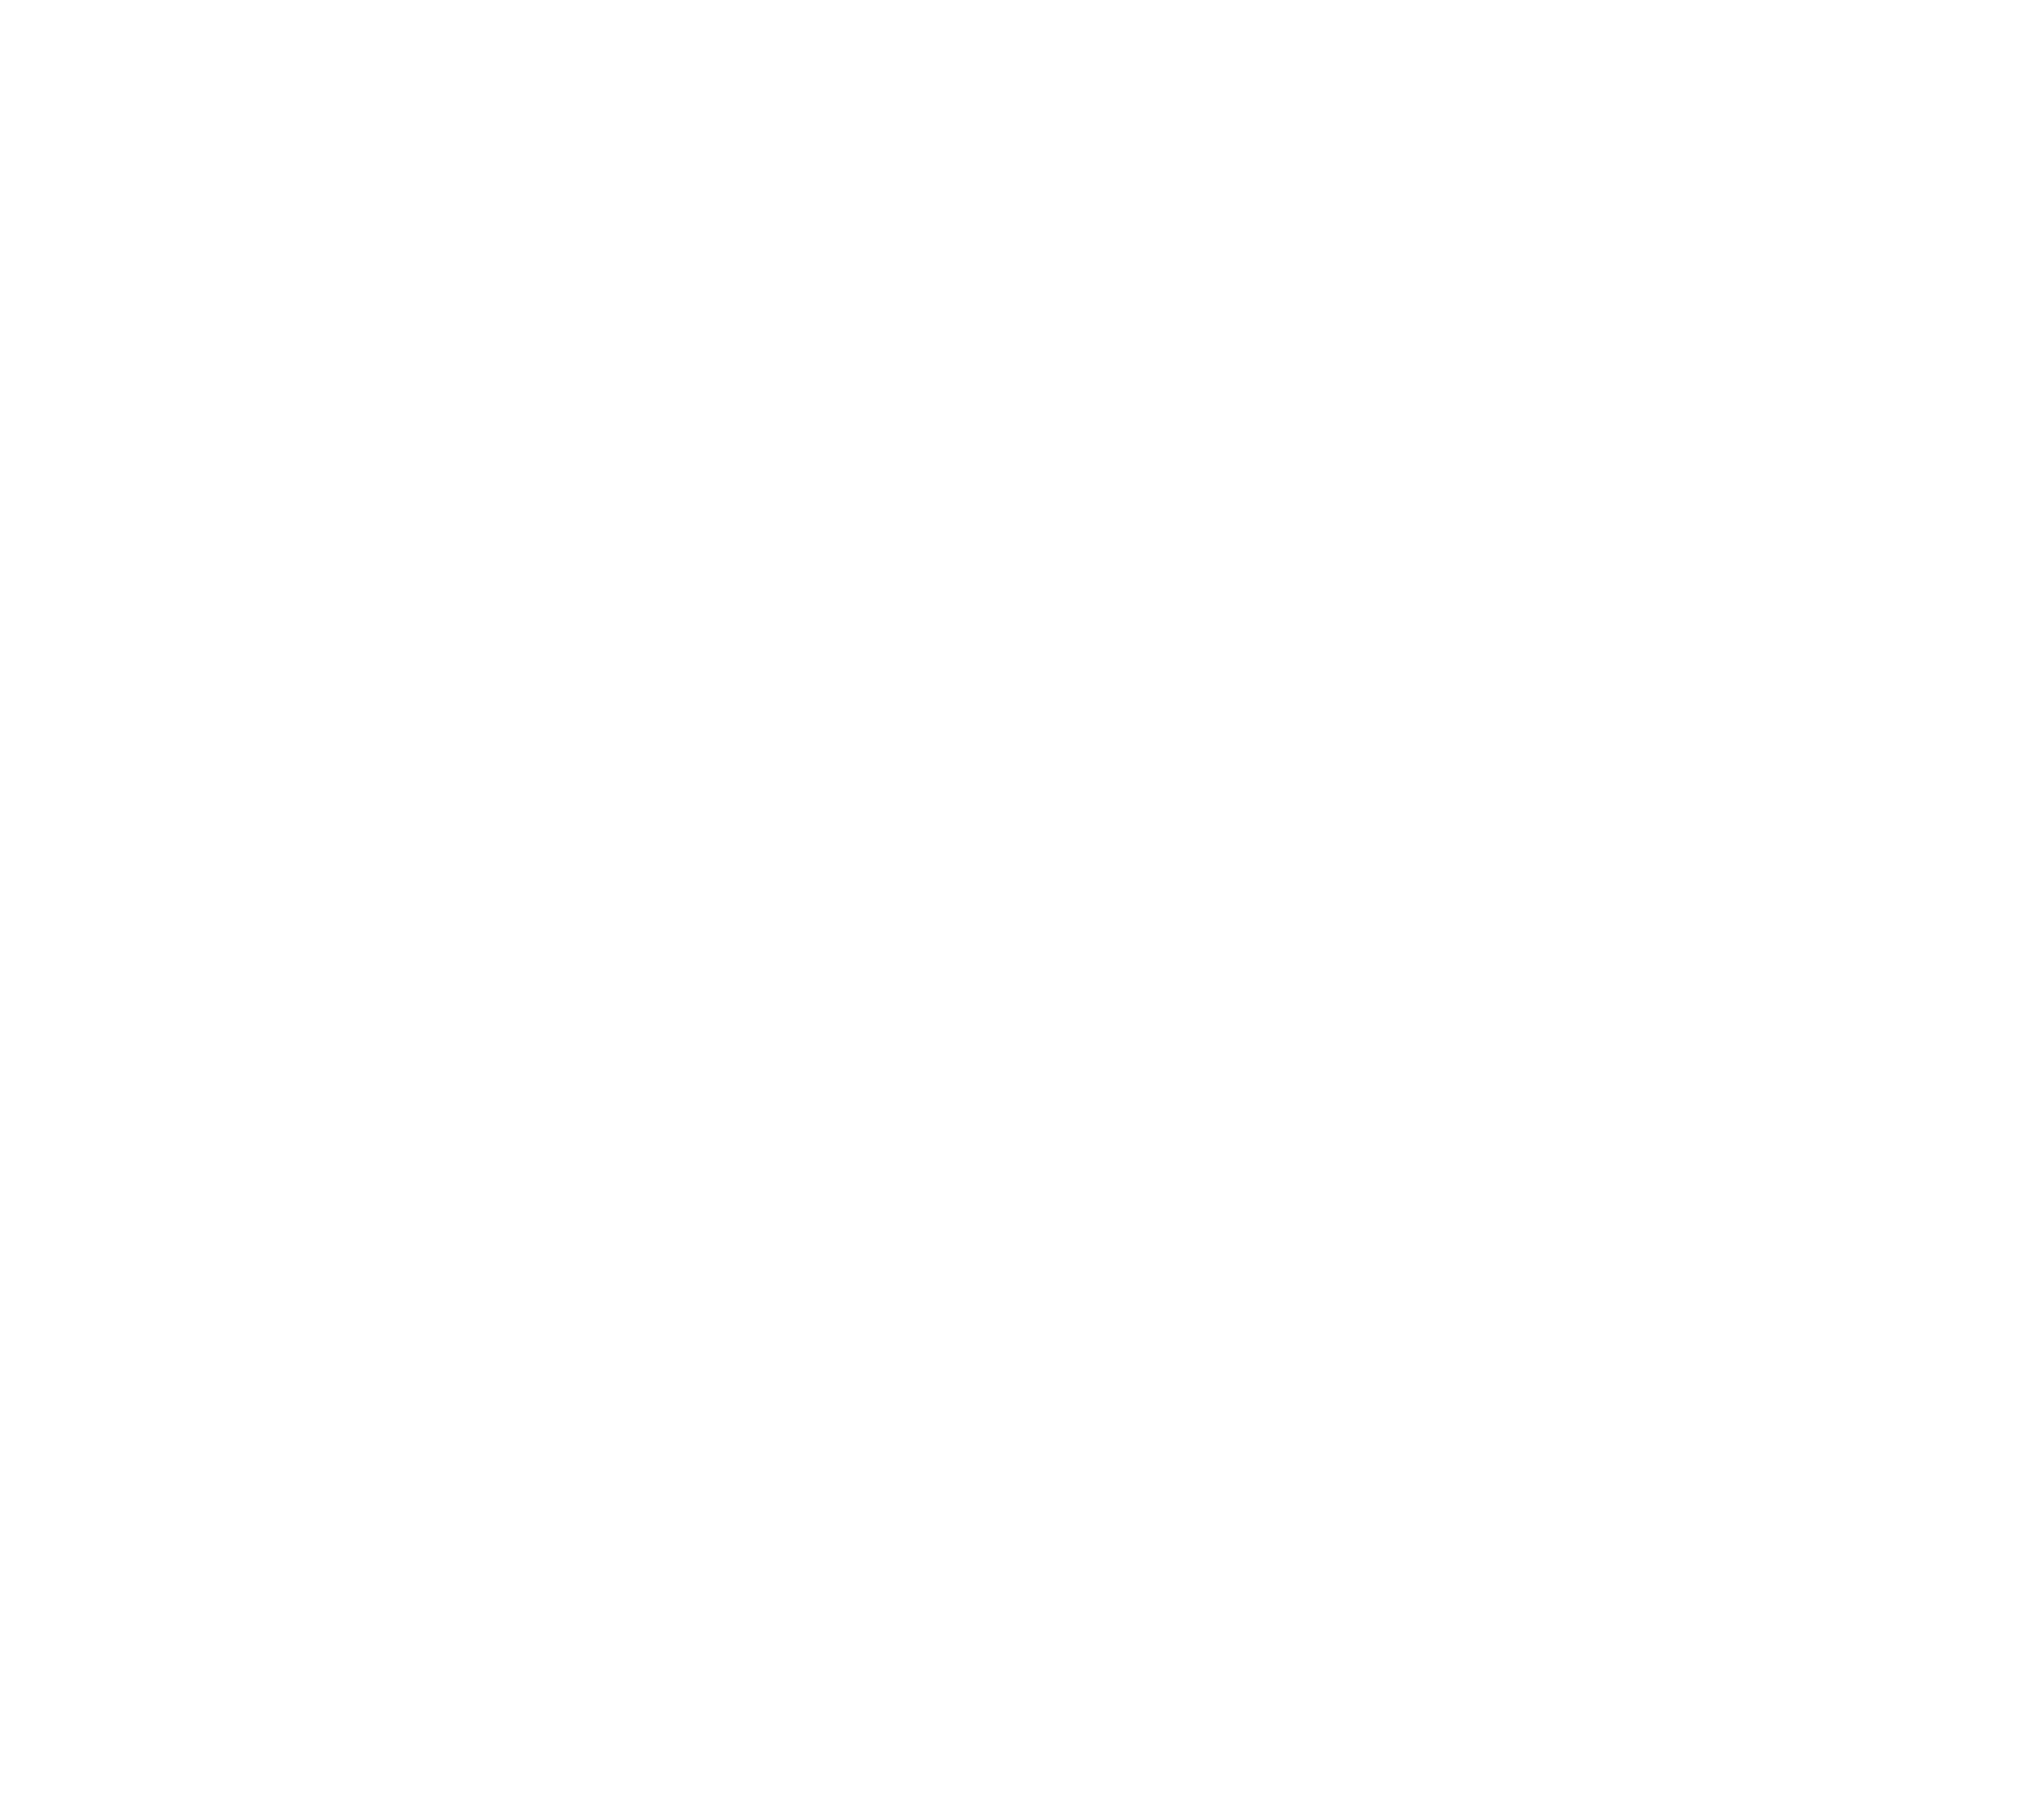 Image with Parascript logo. Oversized cursive "P" overlayed on top of a grid with the word "Parascript" below